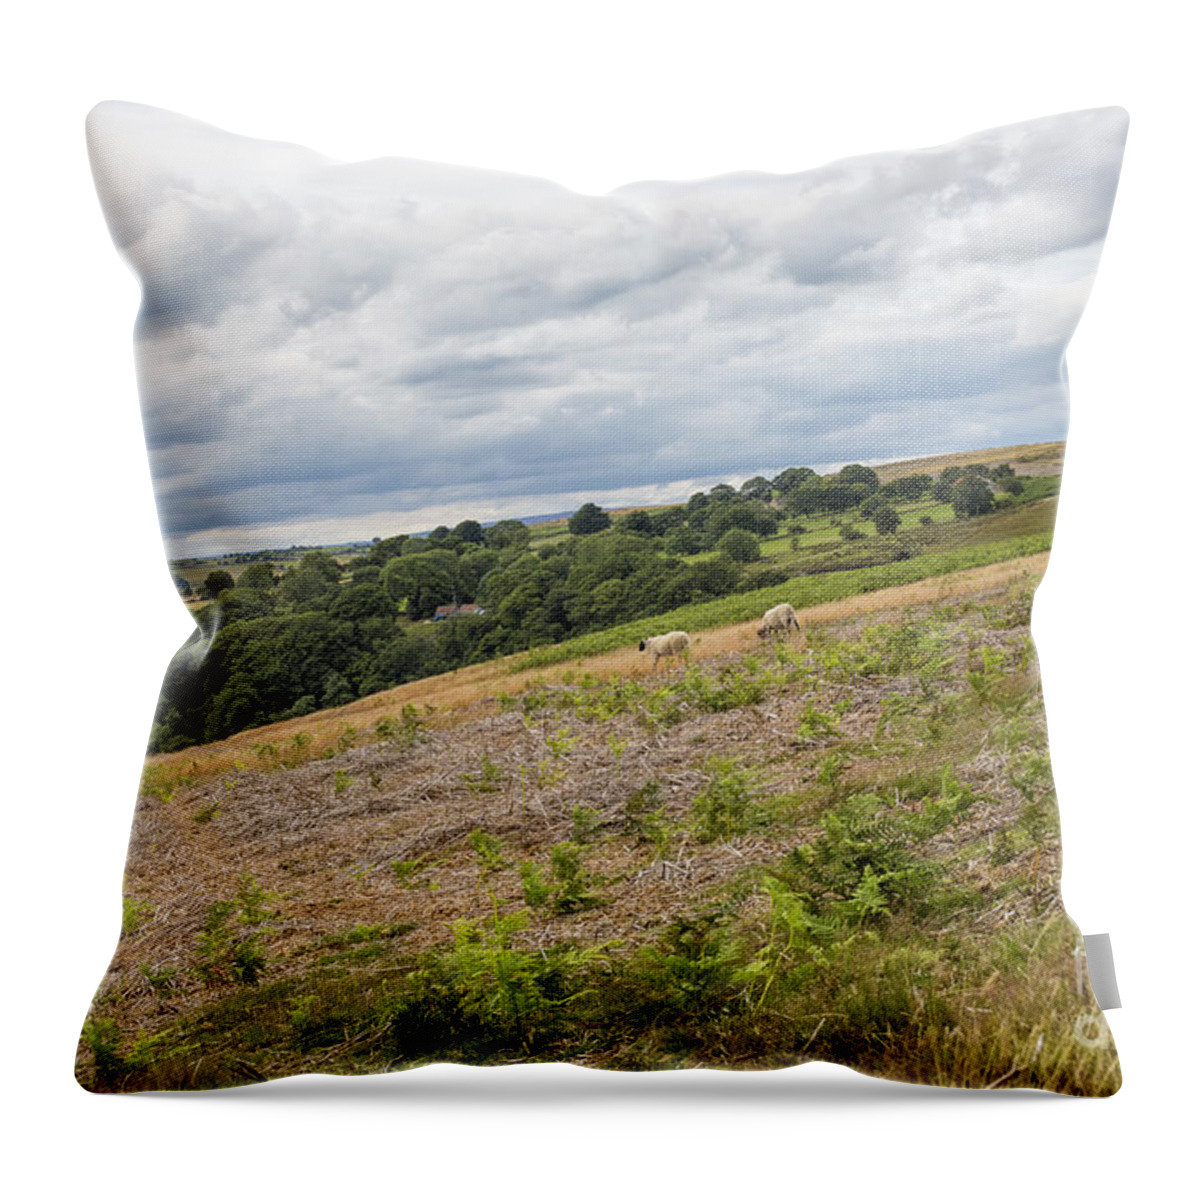 Park Throw Pillow featuring the photograph North Yorkshire Moors by Patricia Hofmeester